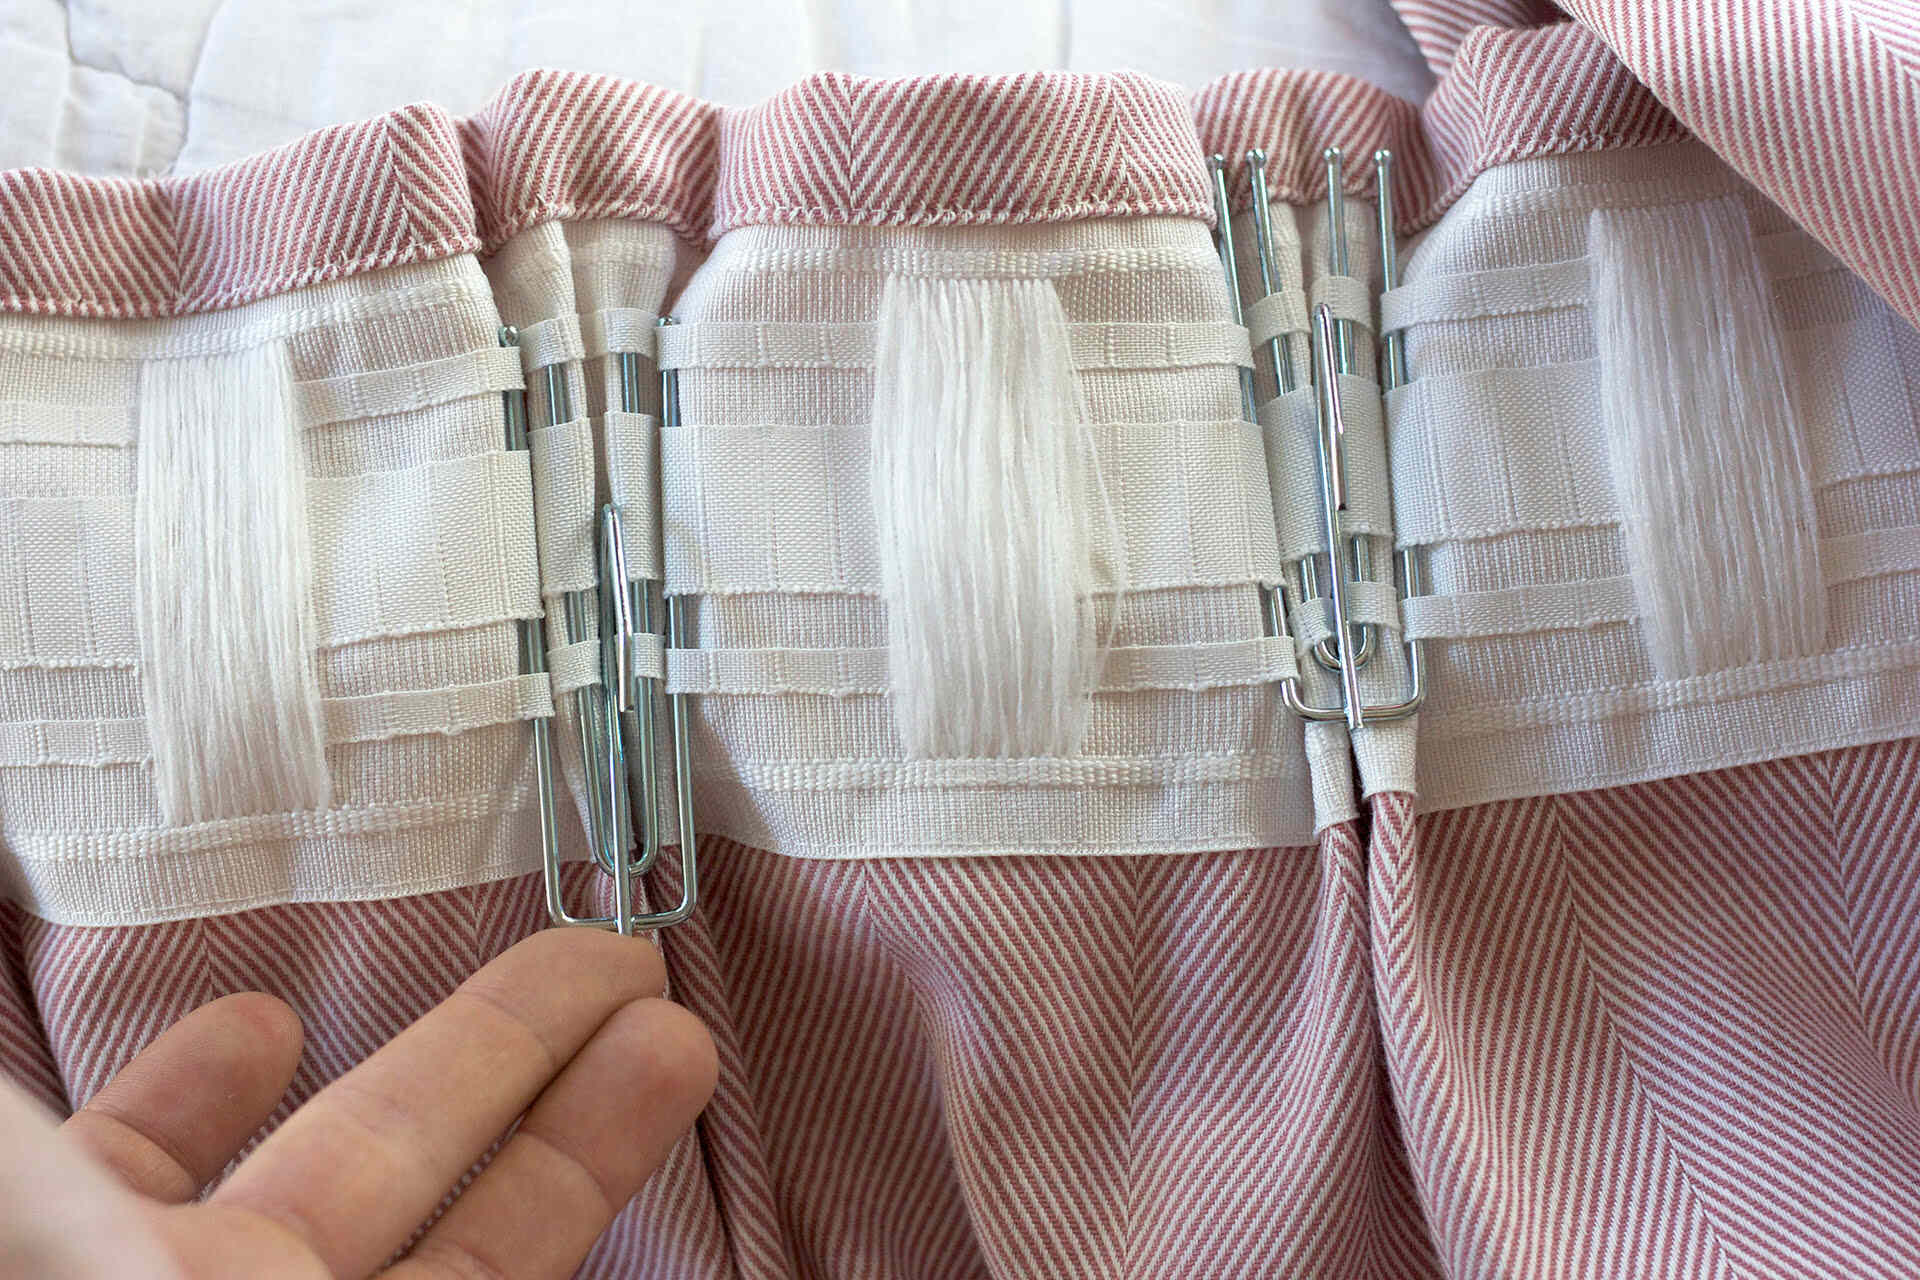 How to Use Pleat Hooks On Ikea Curtains For a High-End Look